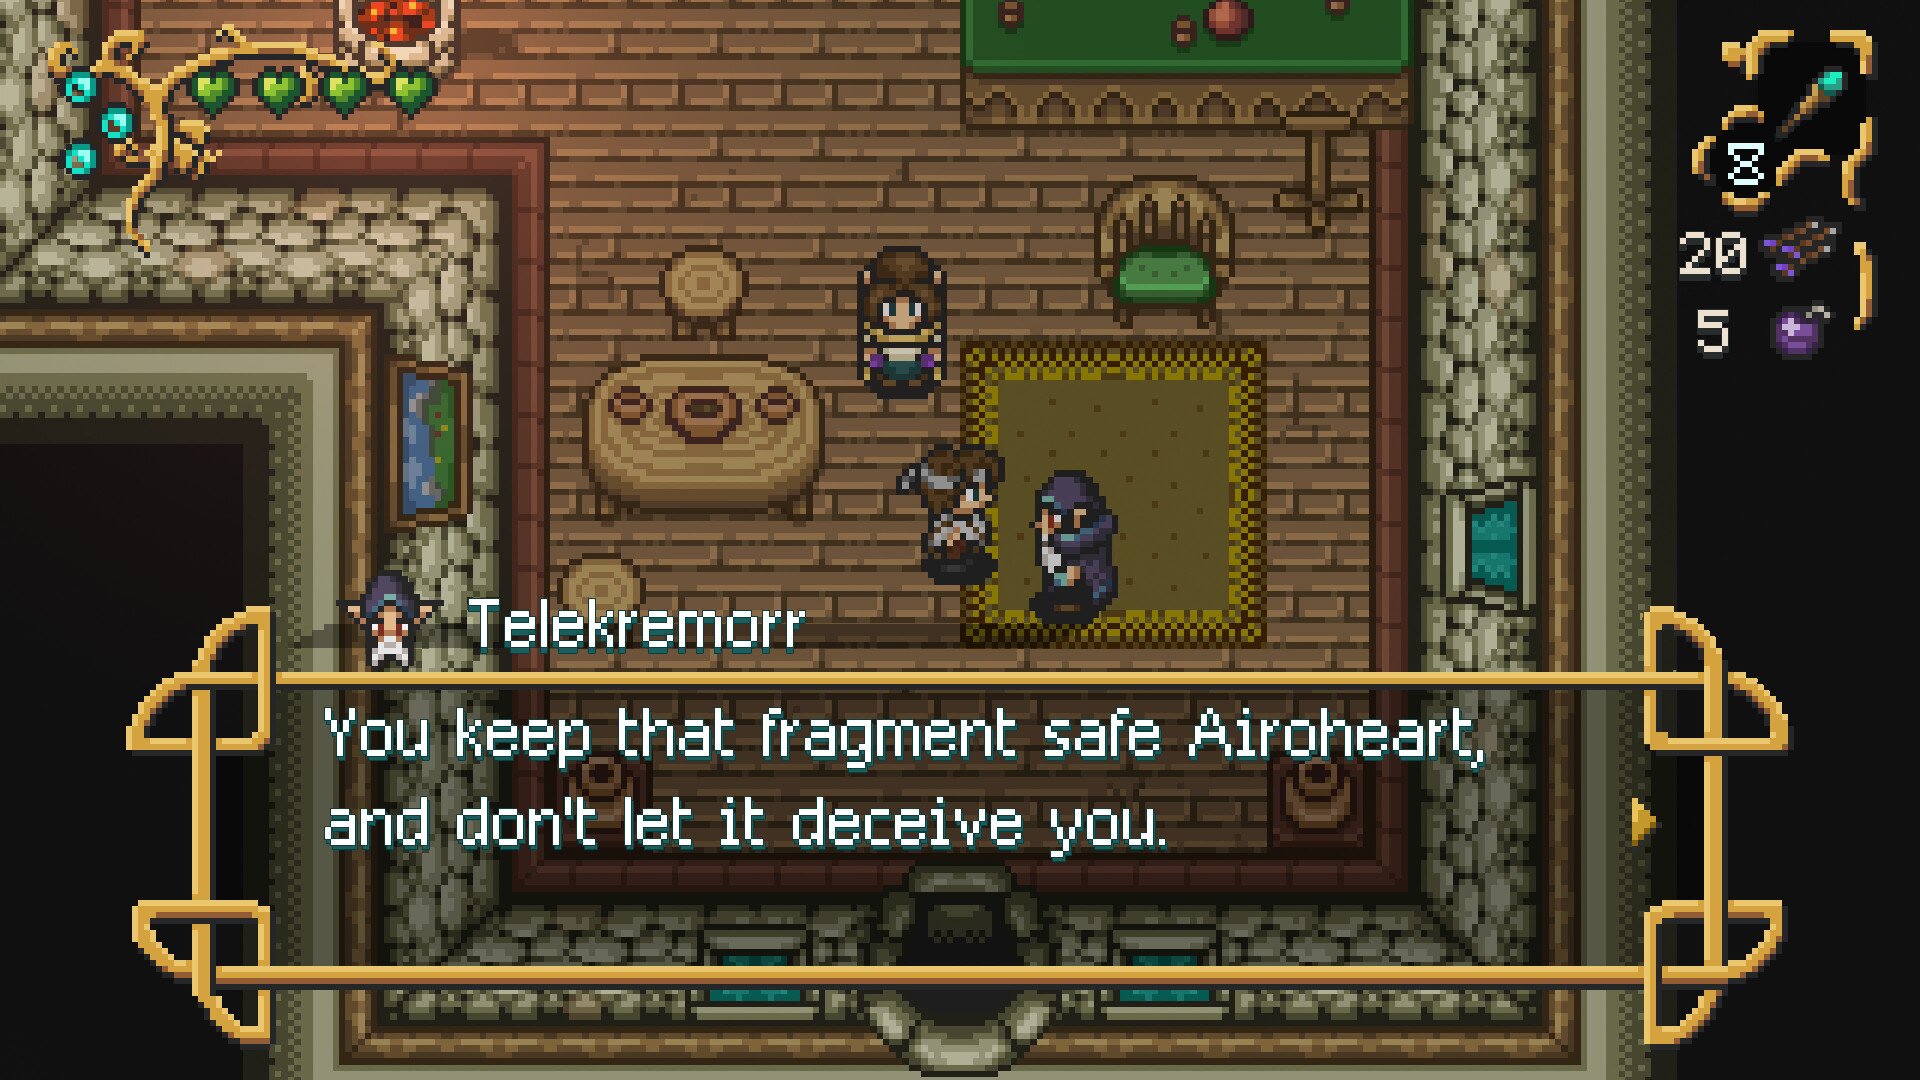 Airoheart download the last version for windows